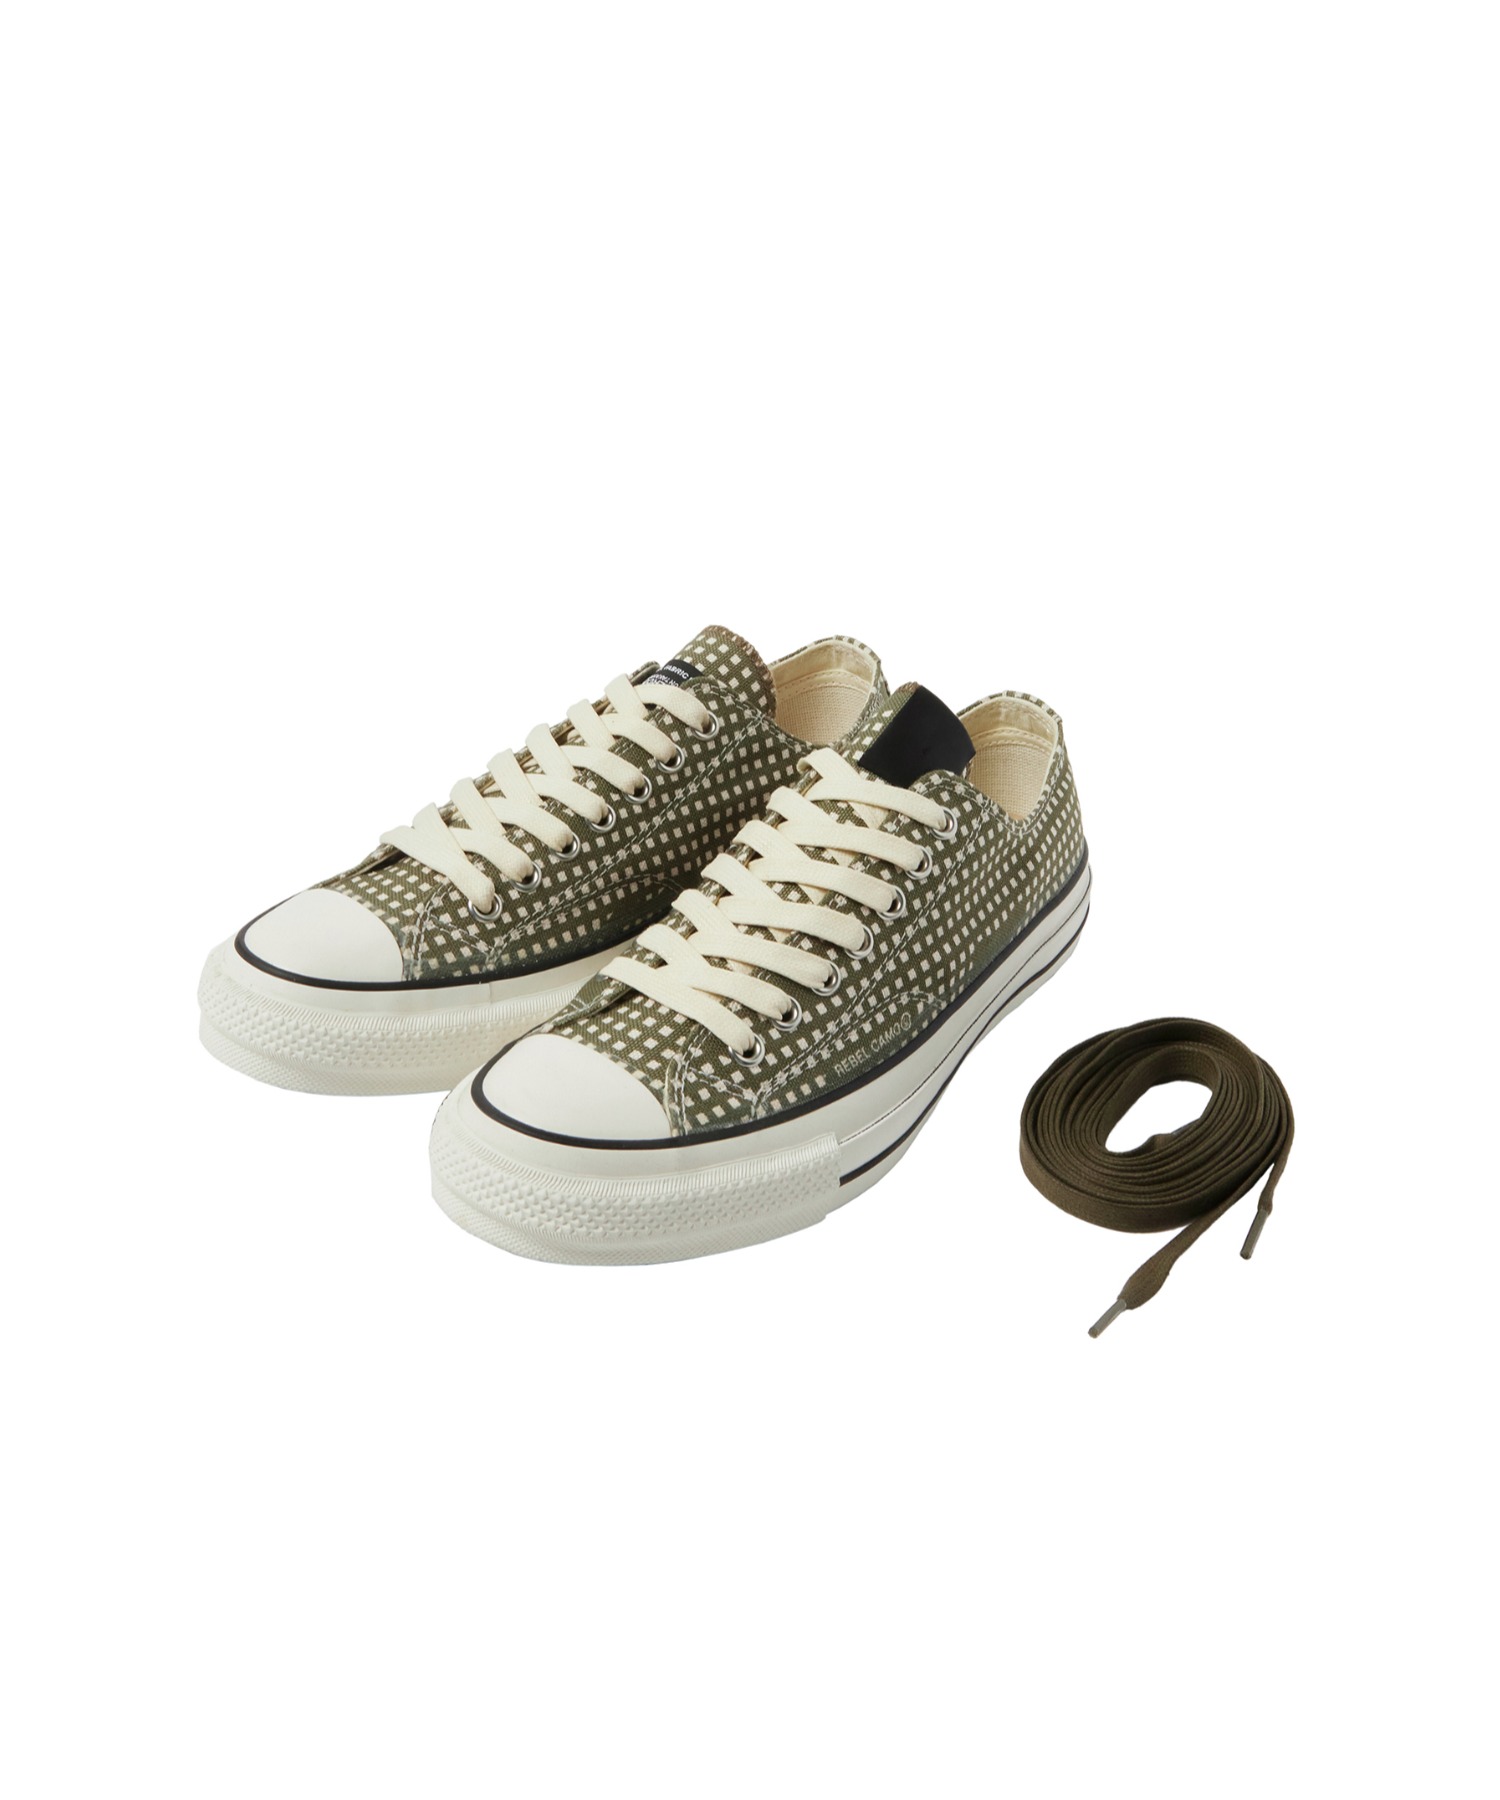 【N.HOOLYWOOD REBEL FABRIC BY UNDERCOVER × CONVERSE ADDICT】